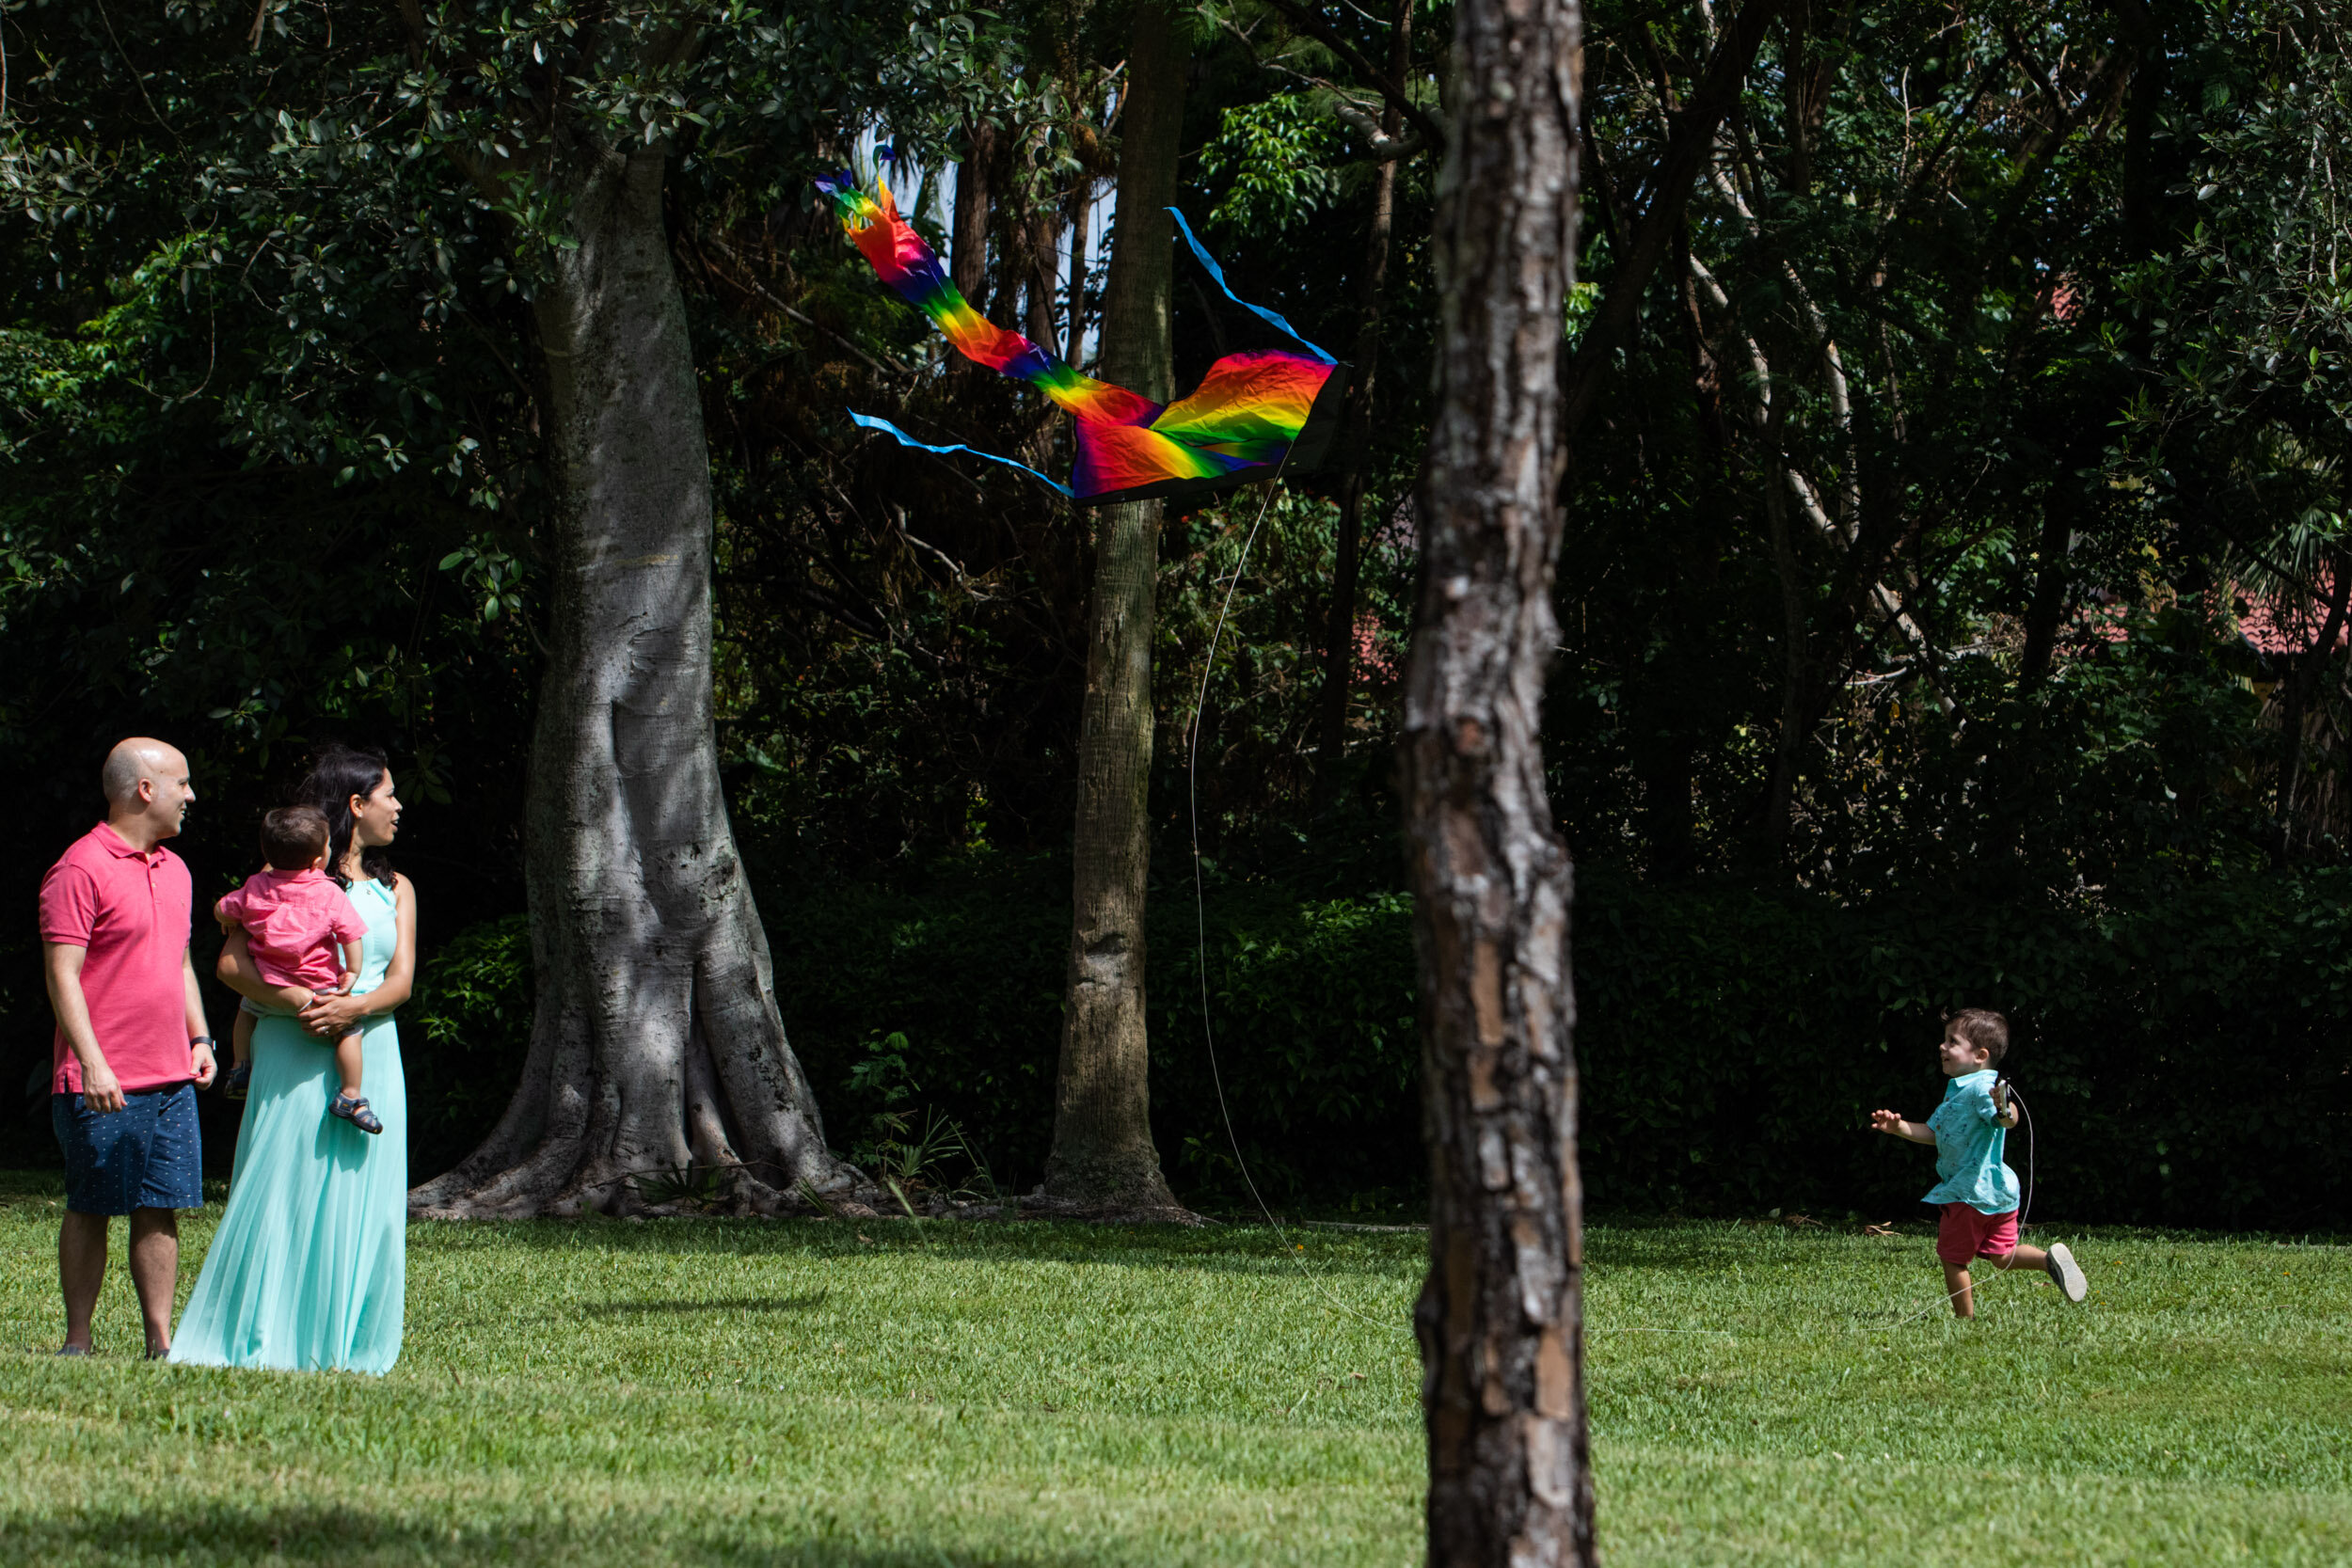 jacksonville family flying a kite together